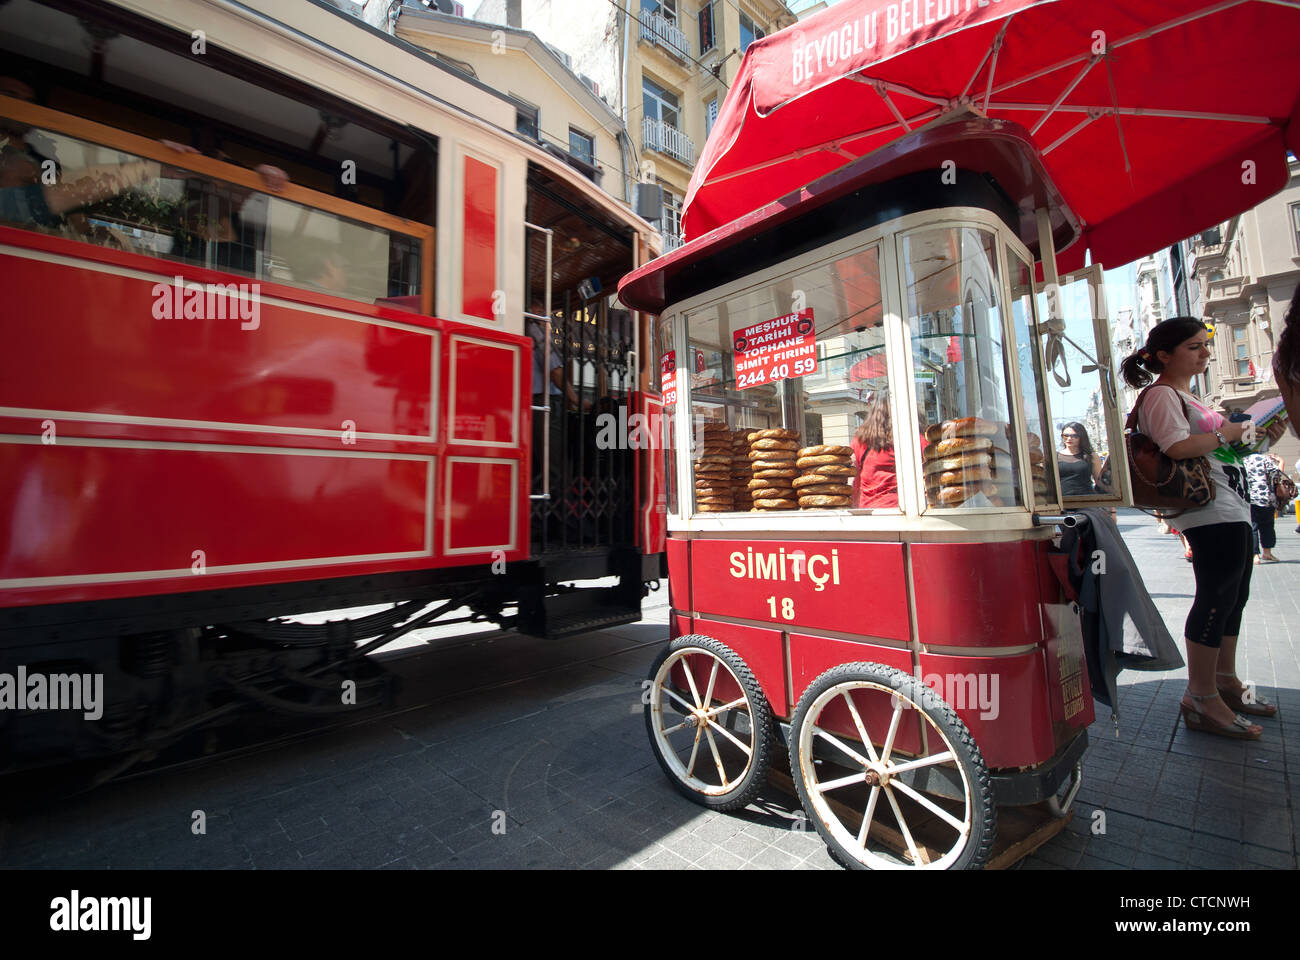 ISTANBUL, TURKEY. A simit cart and tram on Istiklal Caddesi in the Beyoglu district of the city. 2012. Stock Photo